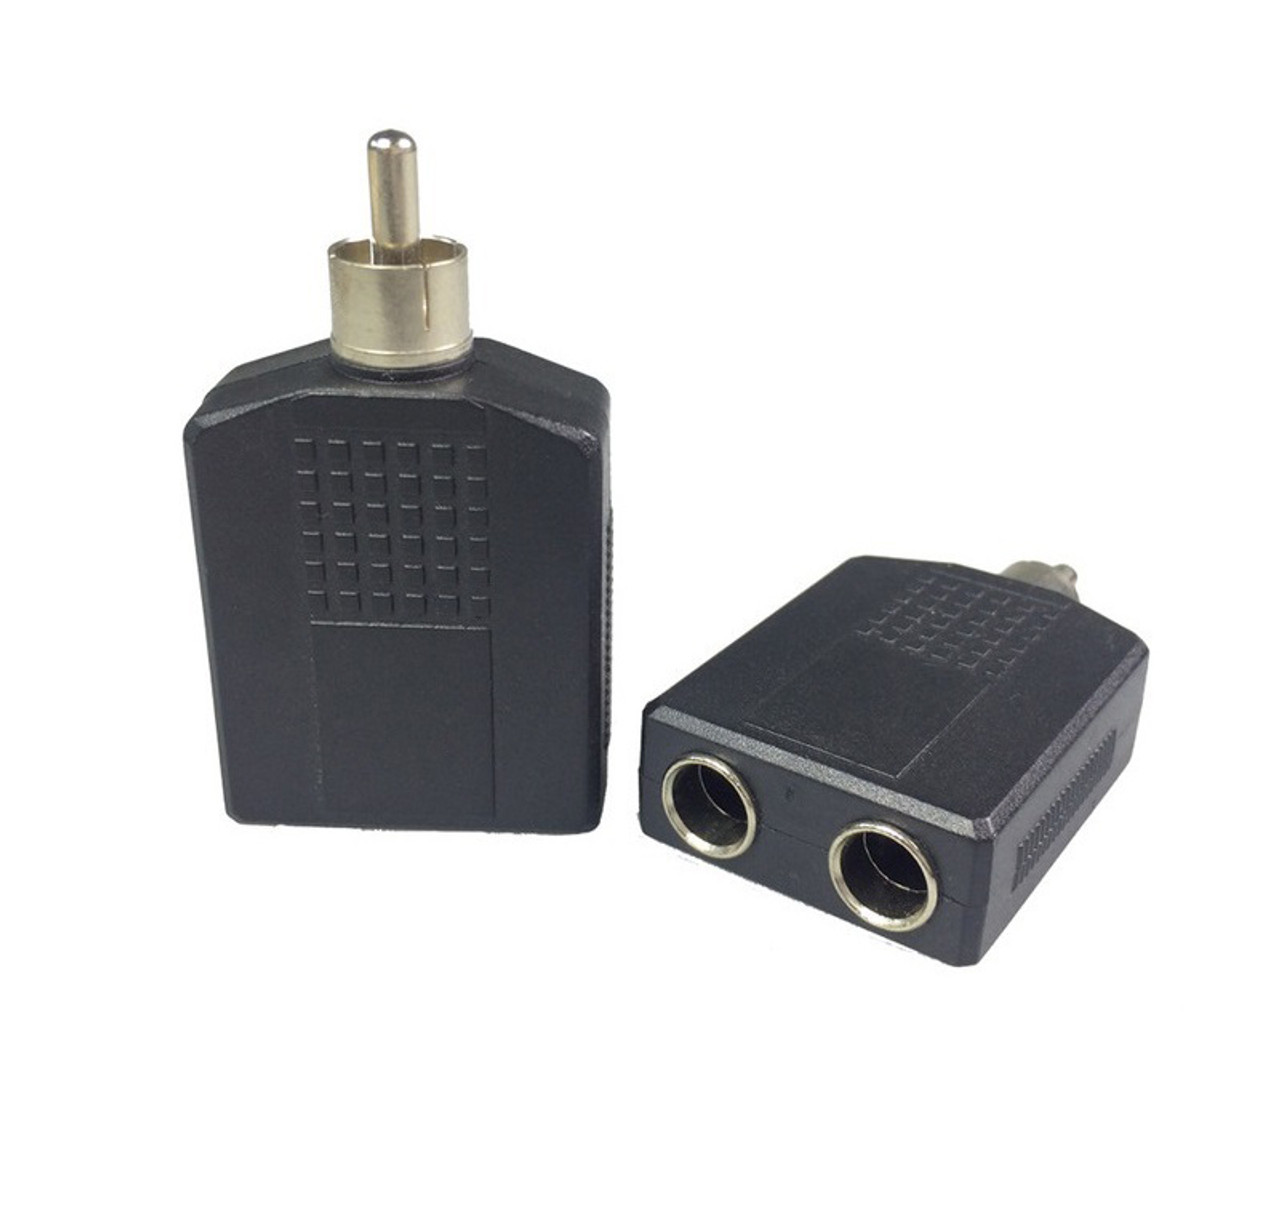 2X RCA Male Plug to Dual 6.35mm 1/4" Female Audio Splitter Converter Connector Adapter